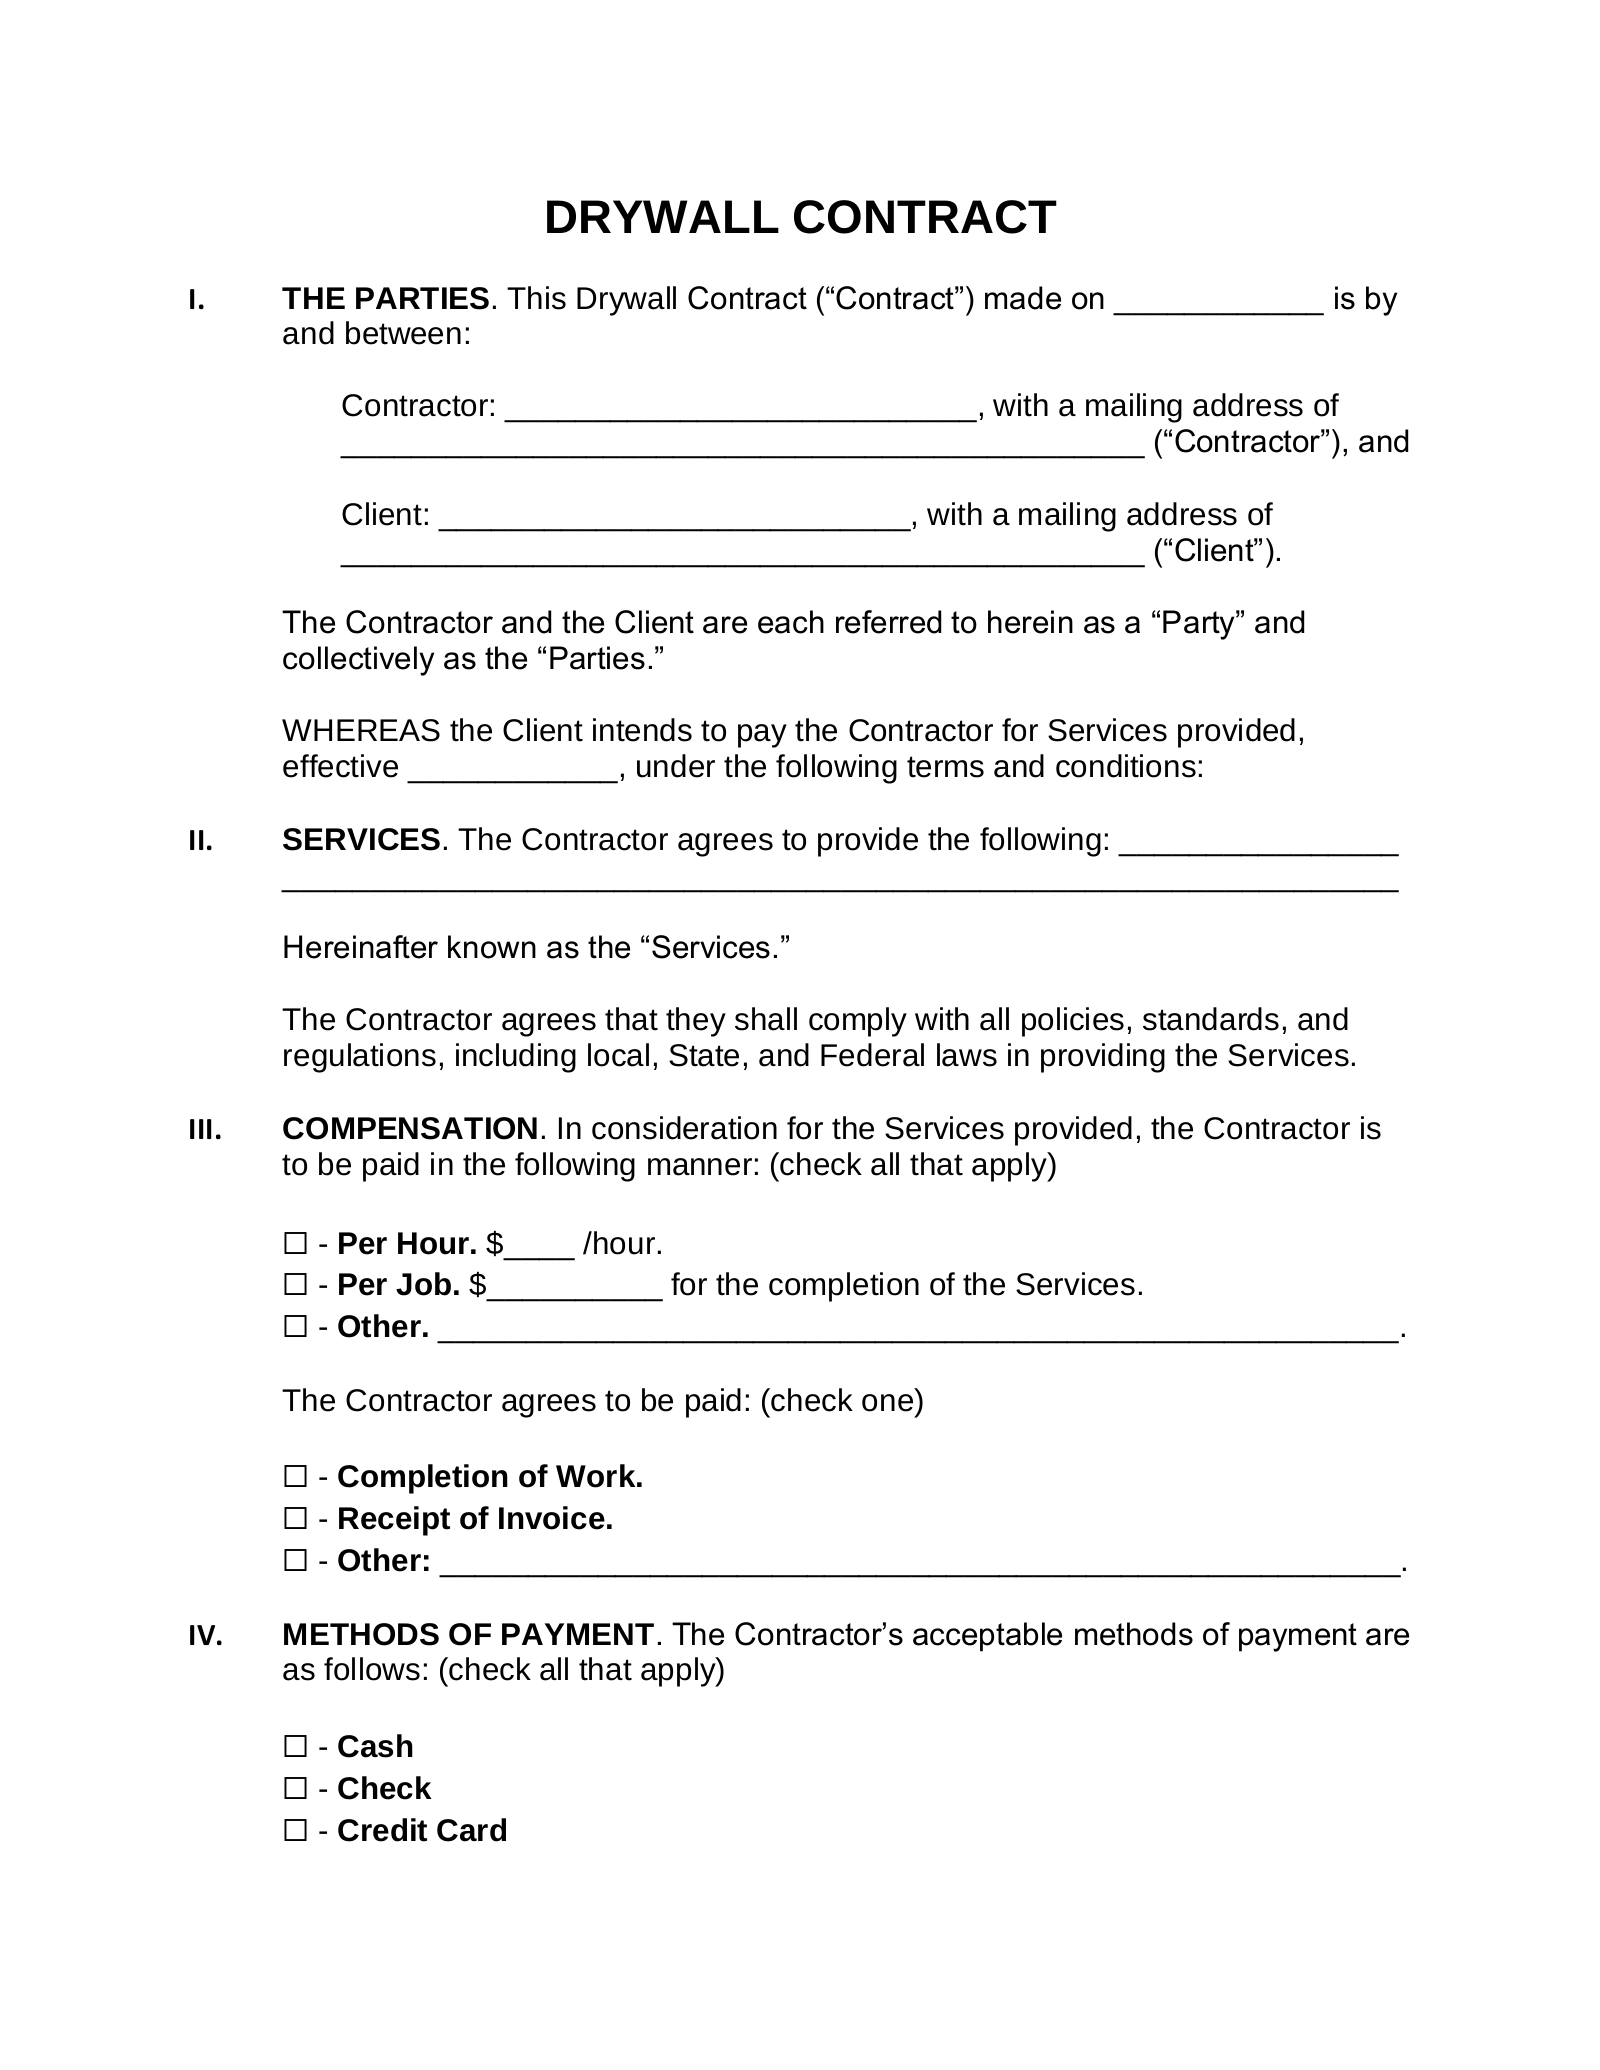 Drywall Contract Template